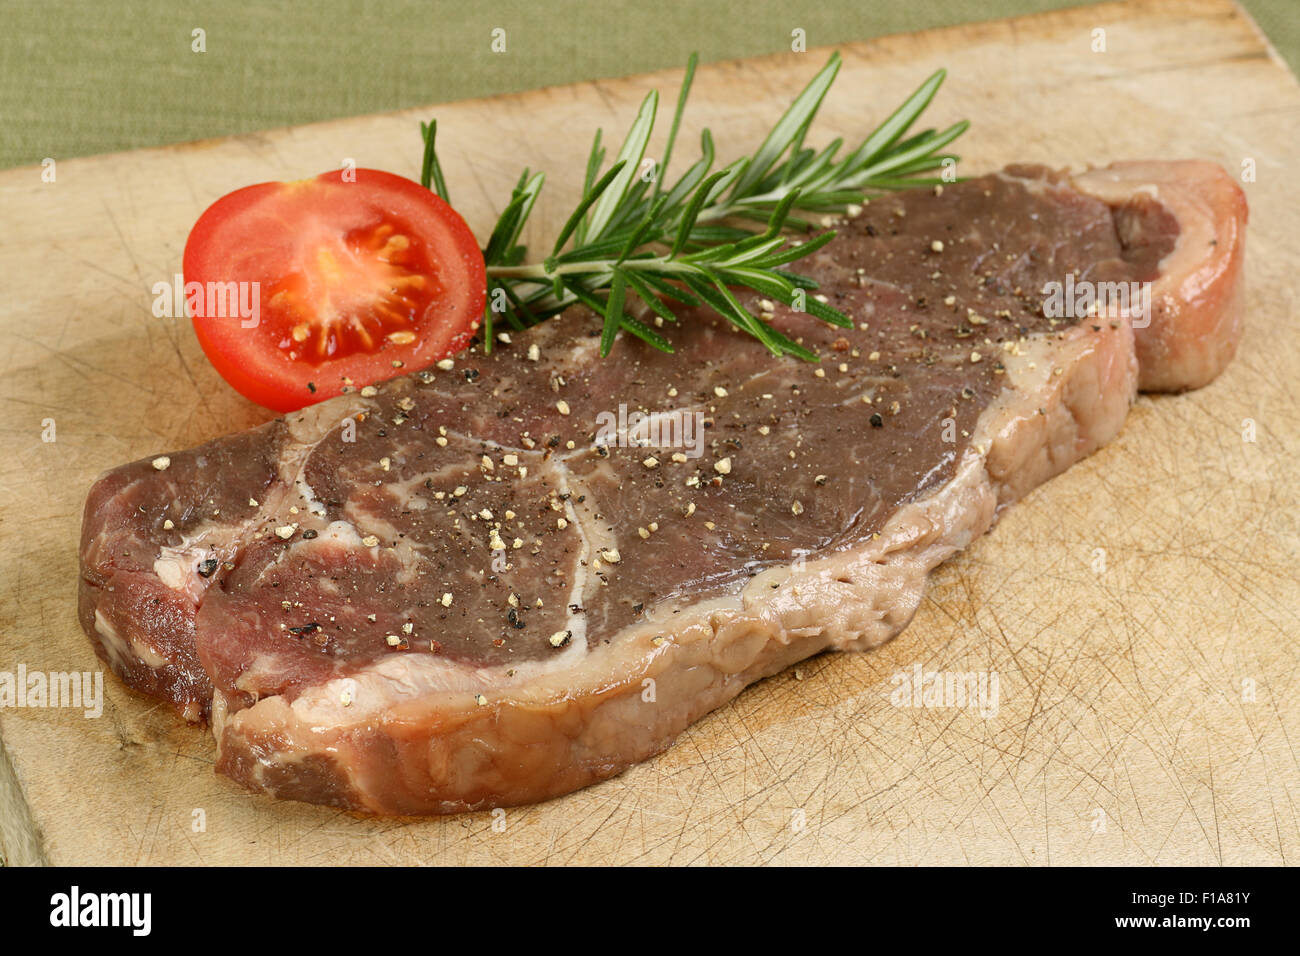 aged sirloin steak uncooked with rosemary and tomato Stock Photo